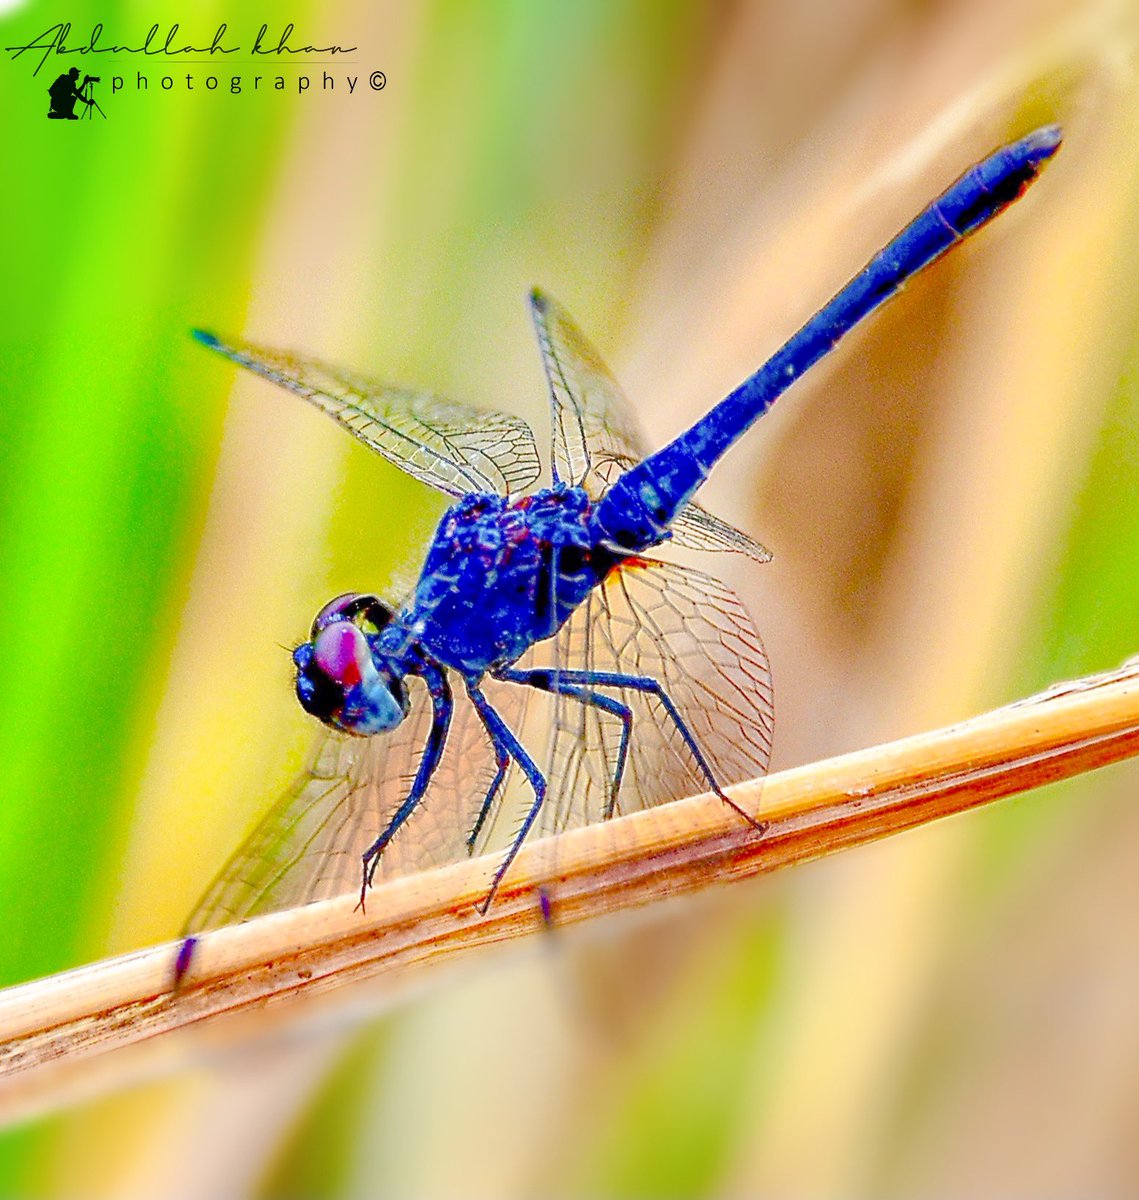 Dragonflies reminds me of my childhood days,catching them for fulfillment then seeing them released until they disappear in the sky #Dragonfly #Dragonflyphotography #NikonD850 #Sigma #nature #naturelovers #macrophotography #naturelovers #TheEarth  #tinyworld #tinyworld